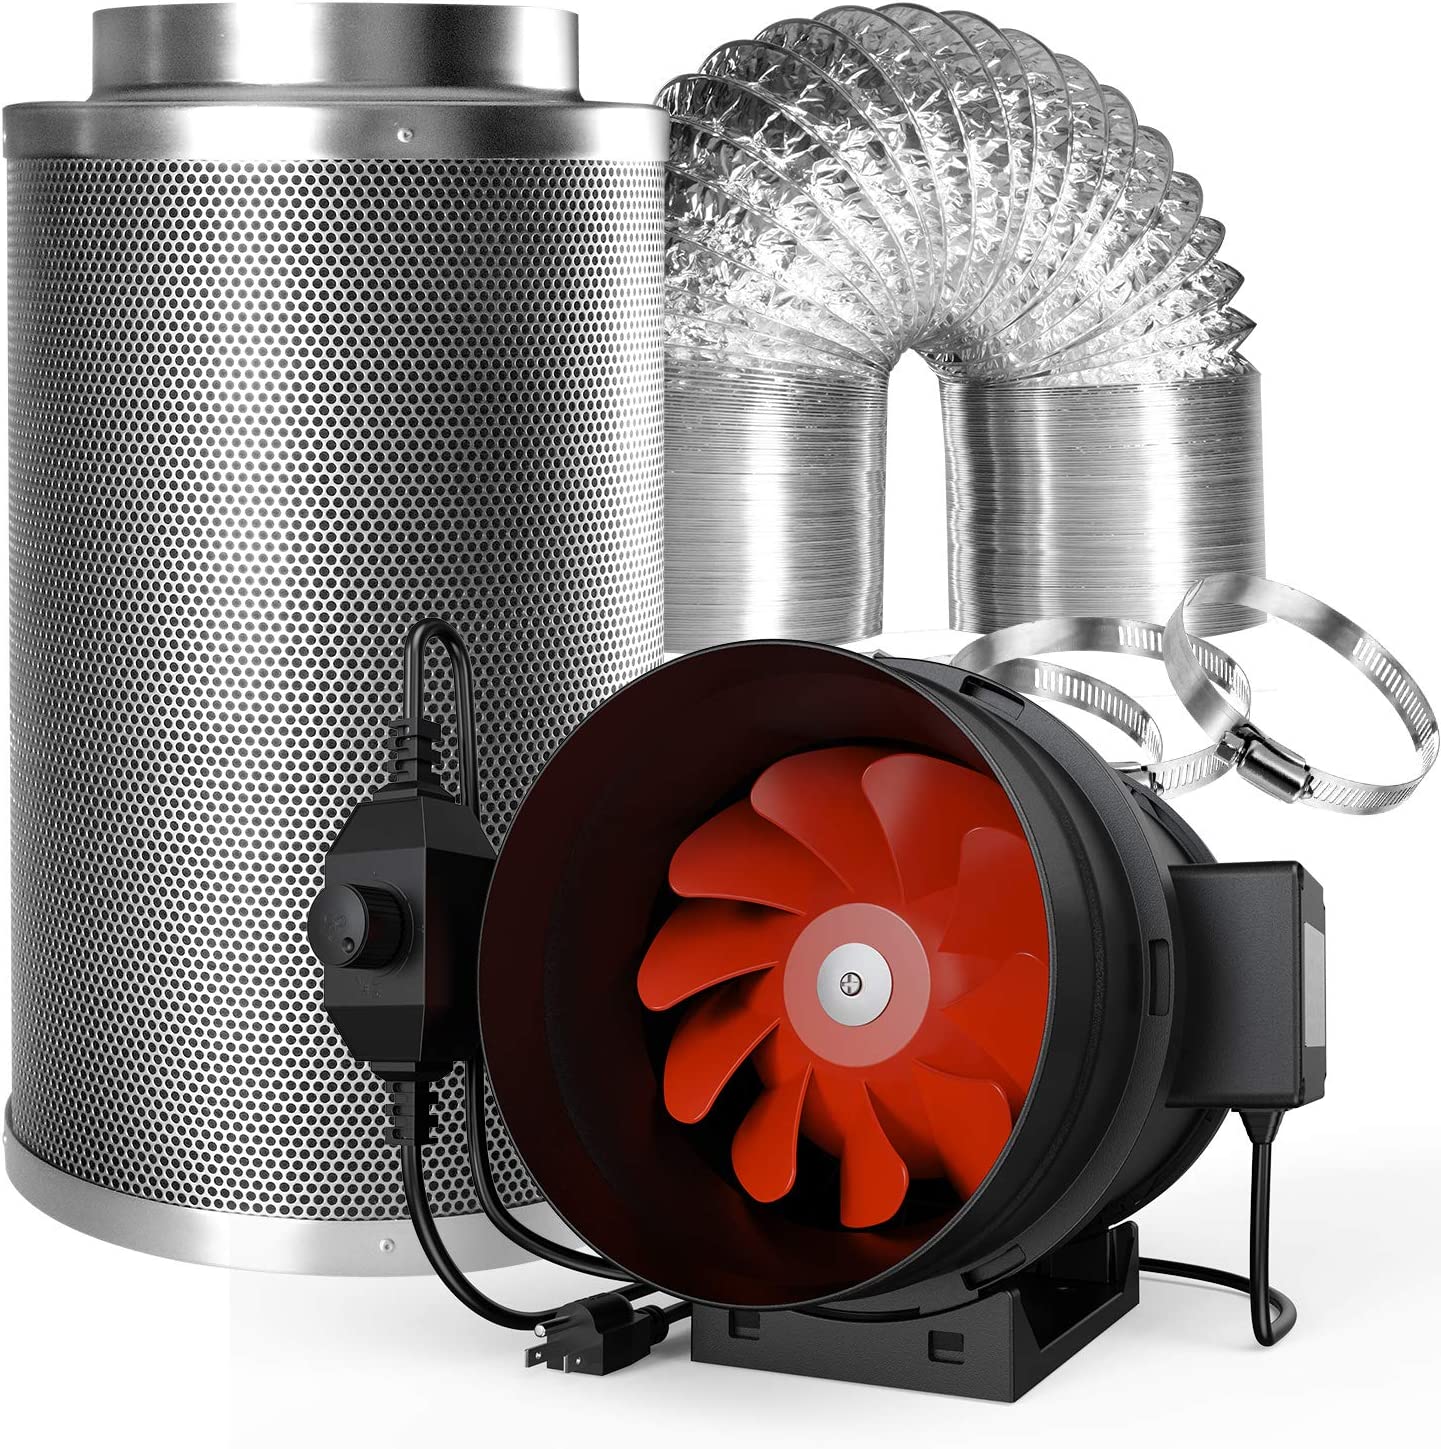 8 Inch Inline Fan Carbon Filter Ducting Kit, 800 CFM Exhaust Fan with Speed Controller Hydroponics Grow Tent Ventilation Kit for Heating Cooling Booster, Grow Tents, Hydroponics